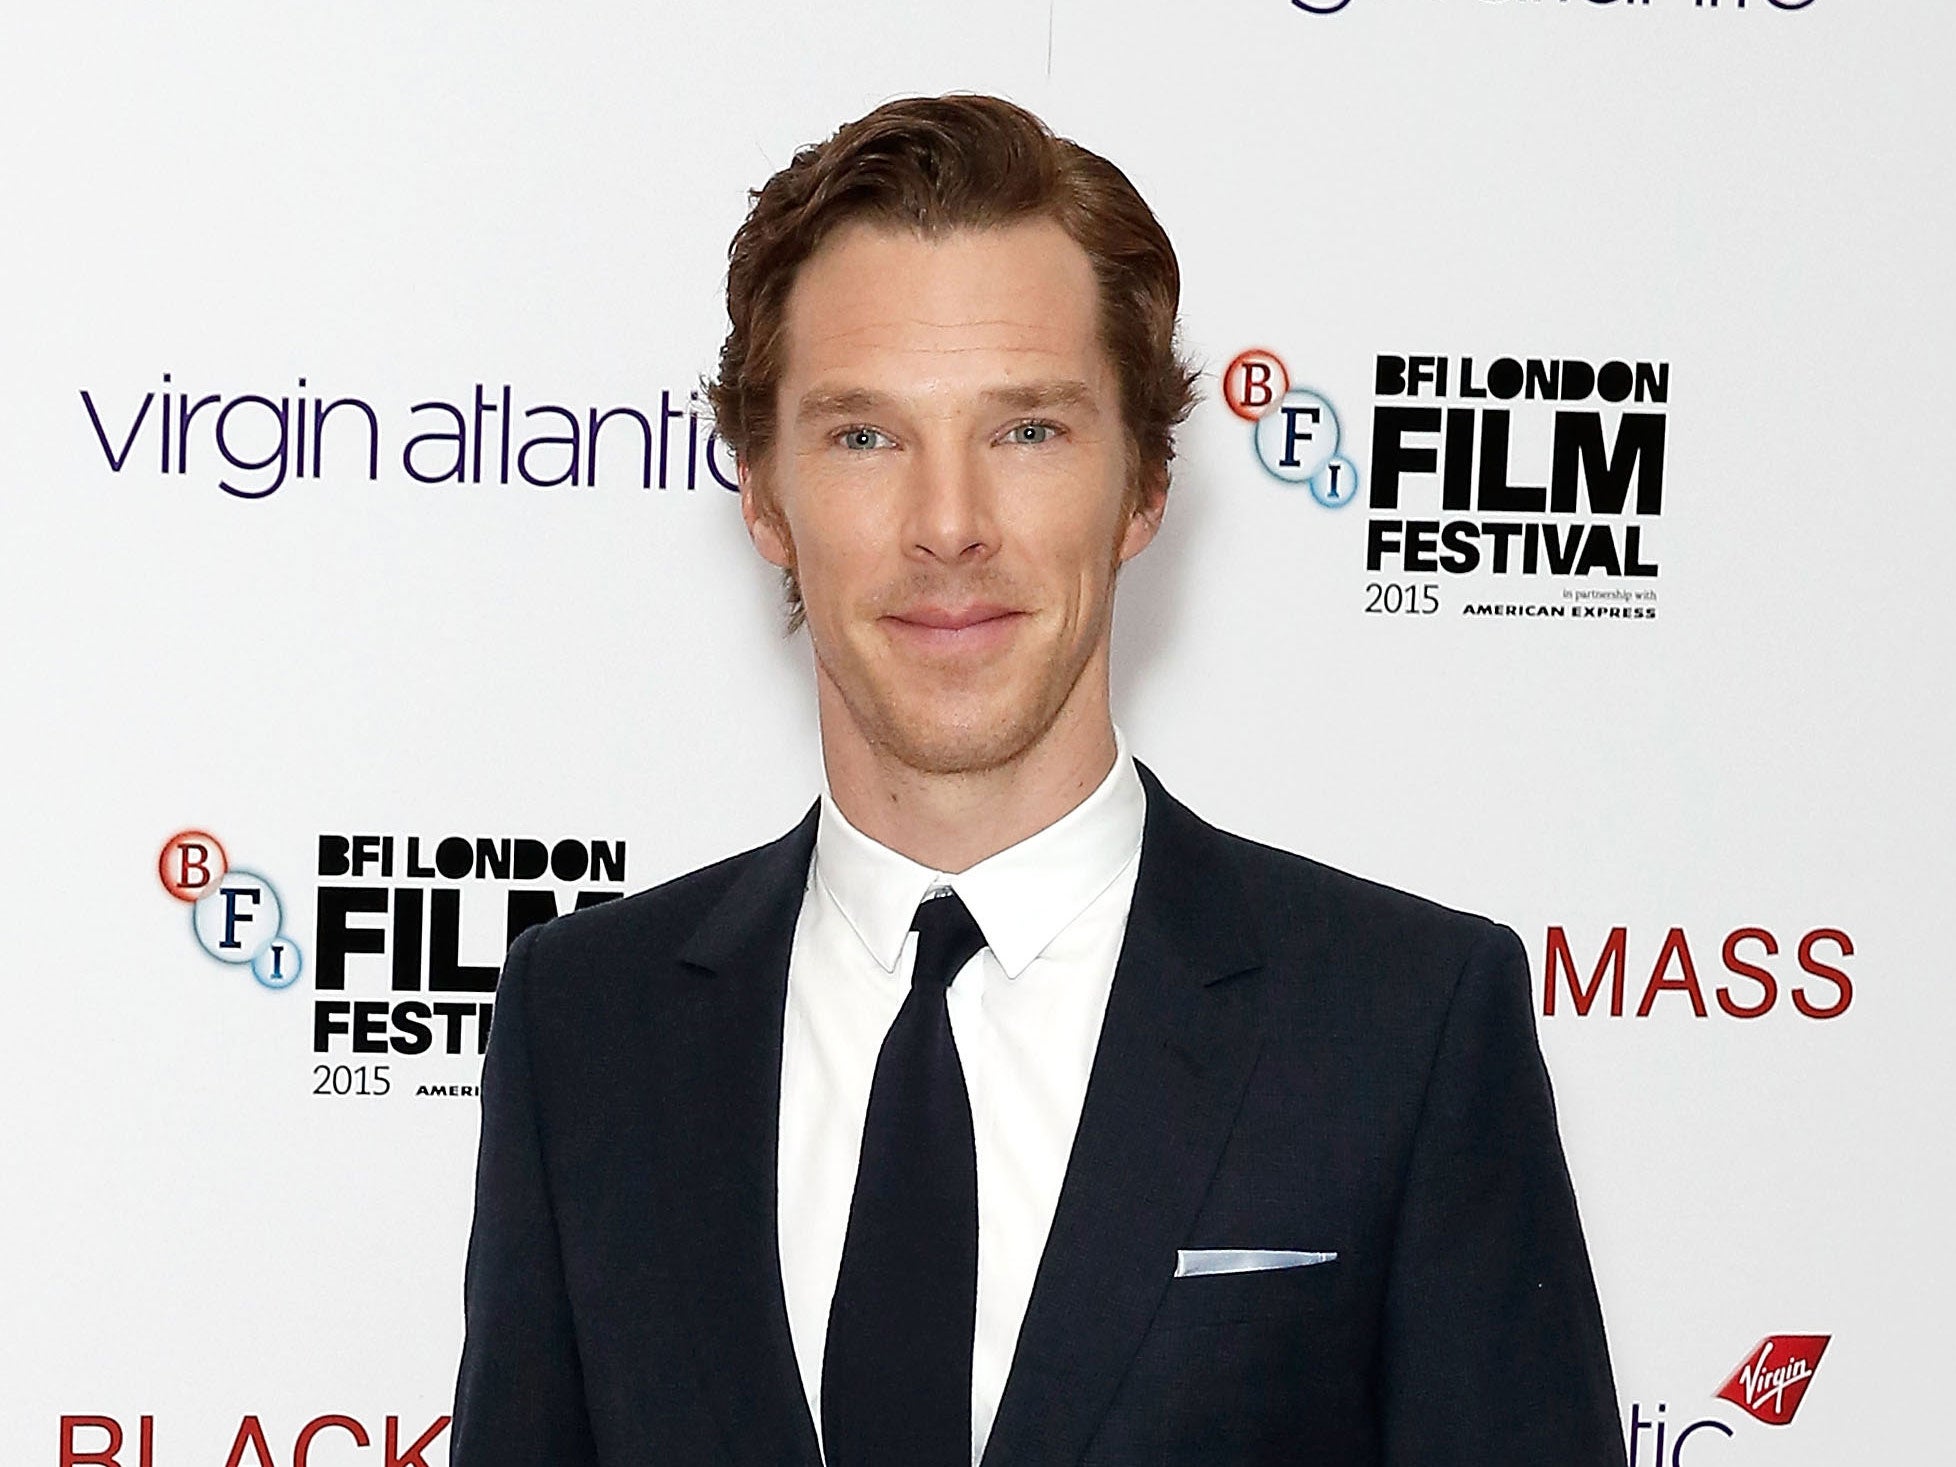 Benedict Cumberbatch has continually tried to raise awareness of the refugee crisis